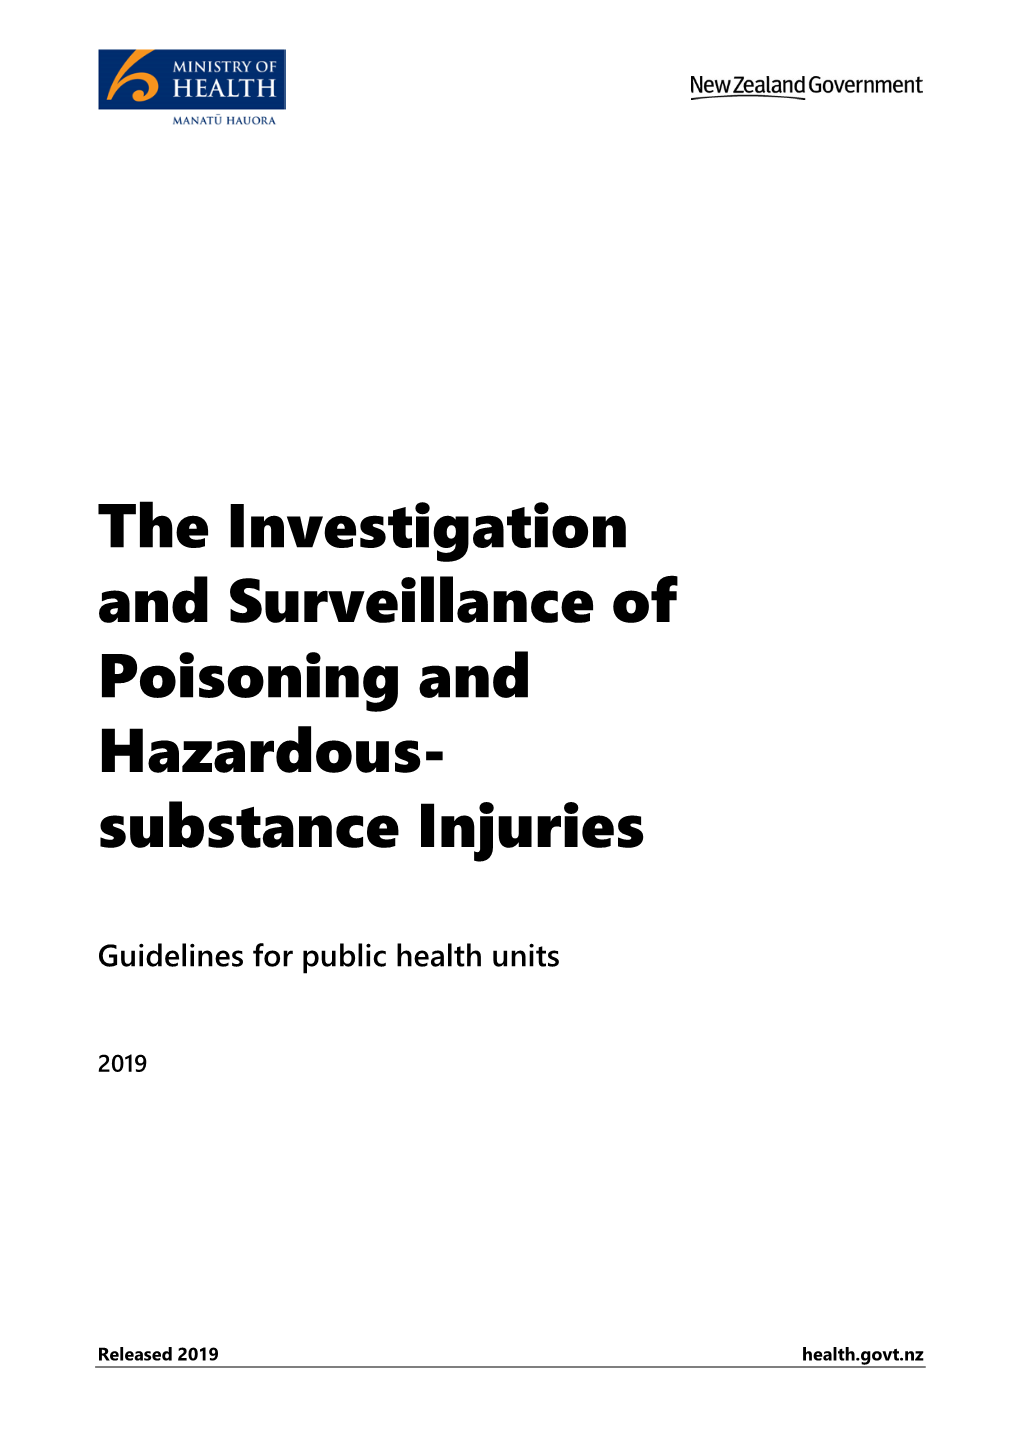 The Investigation and Surveillance of Poisoning and Hazardous- Substance Injuries